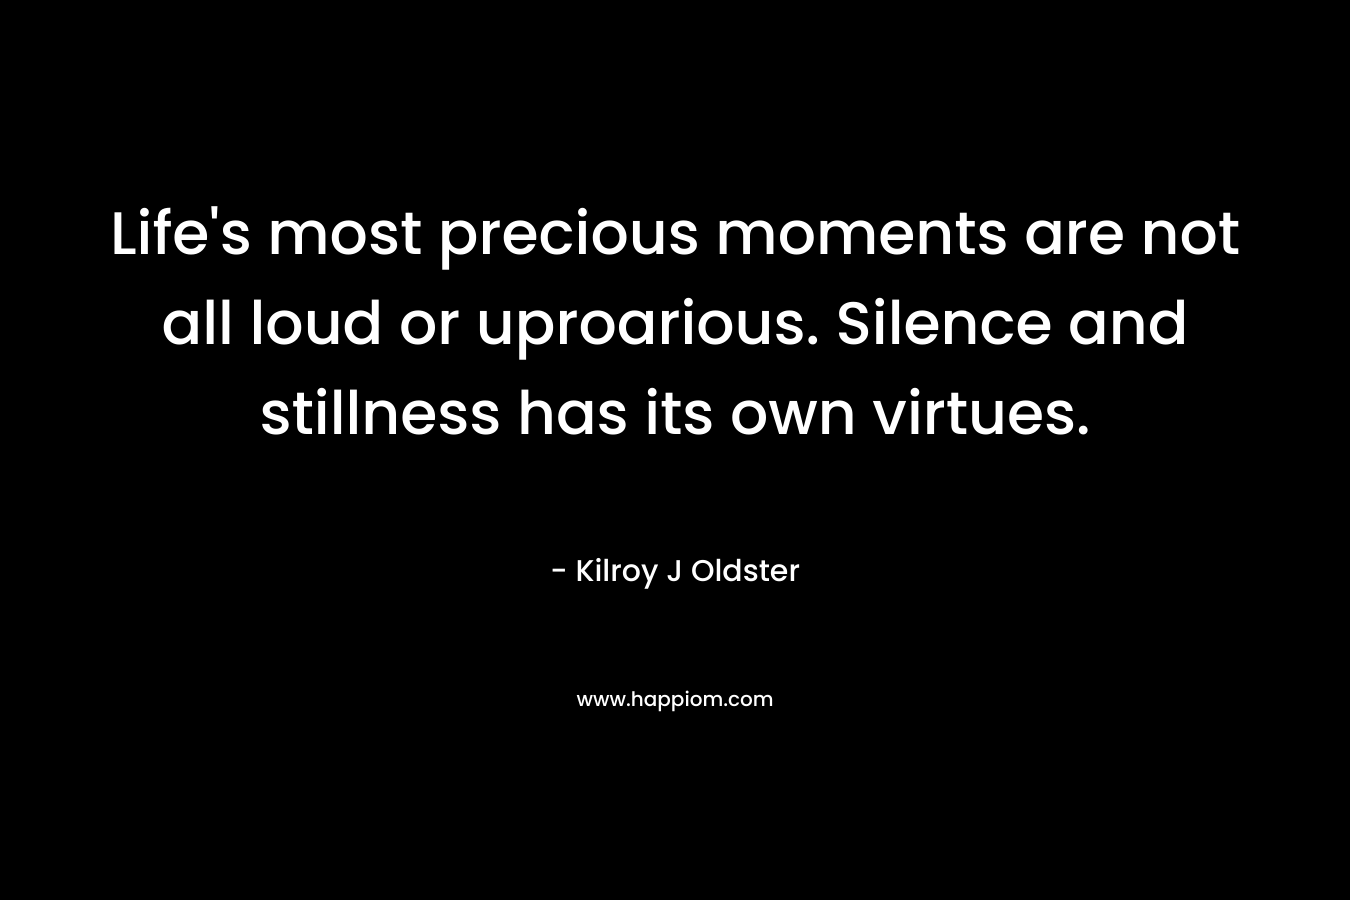 Life’s most precious moments are not all loud or uproarious. Silence and stillness has its own virtues. – Kilroy J Oldster